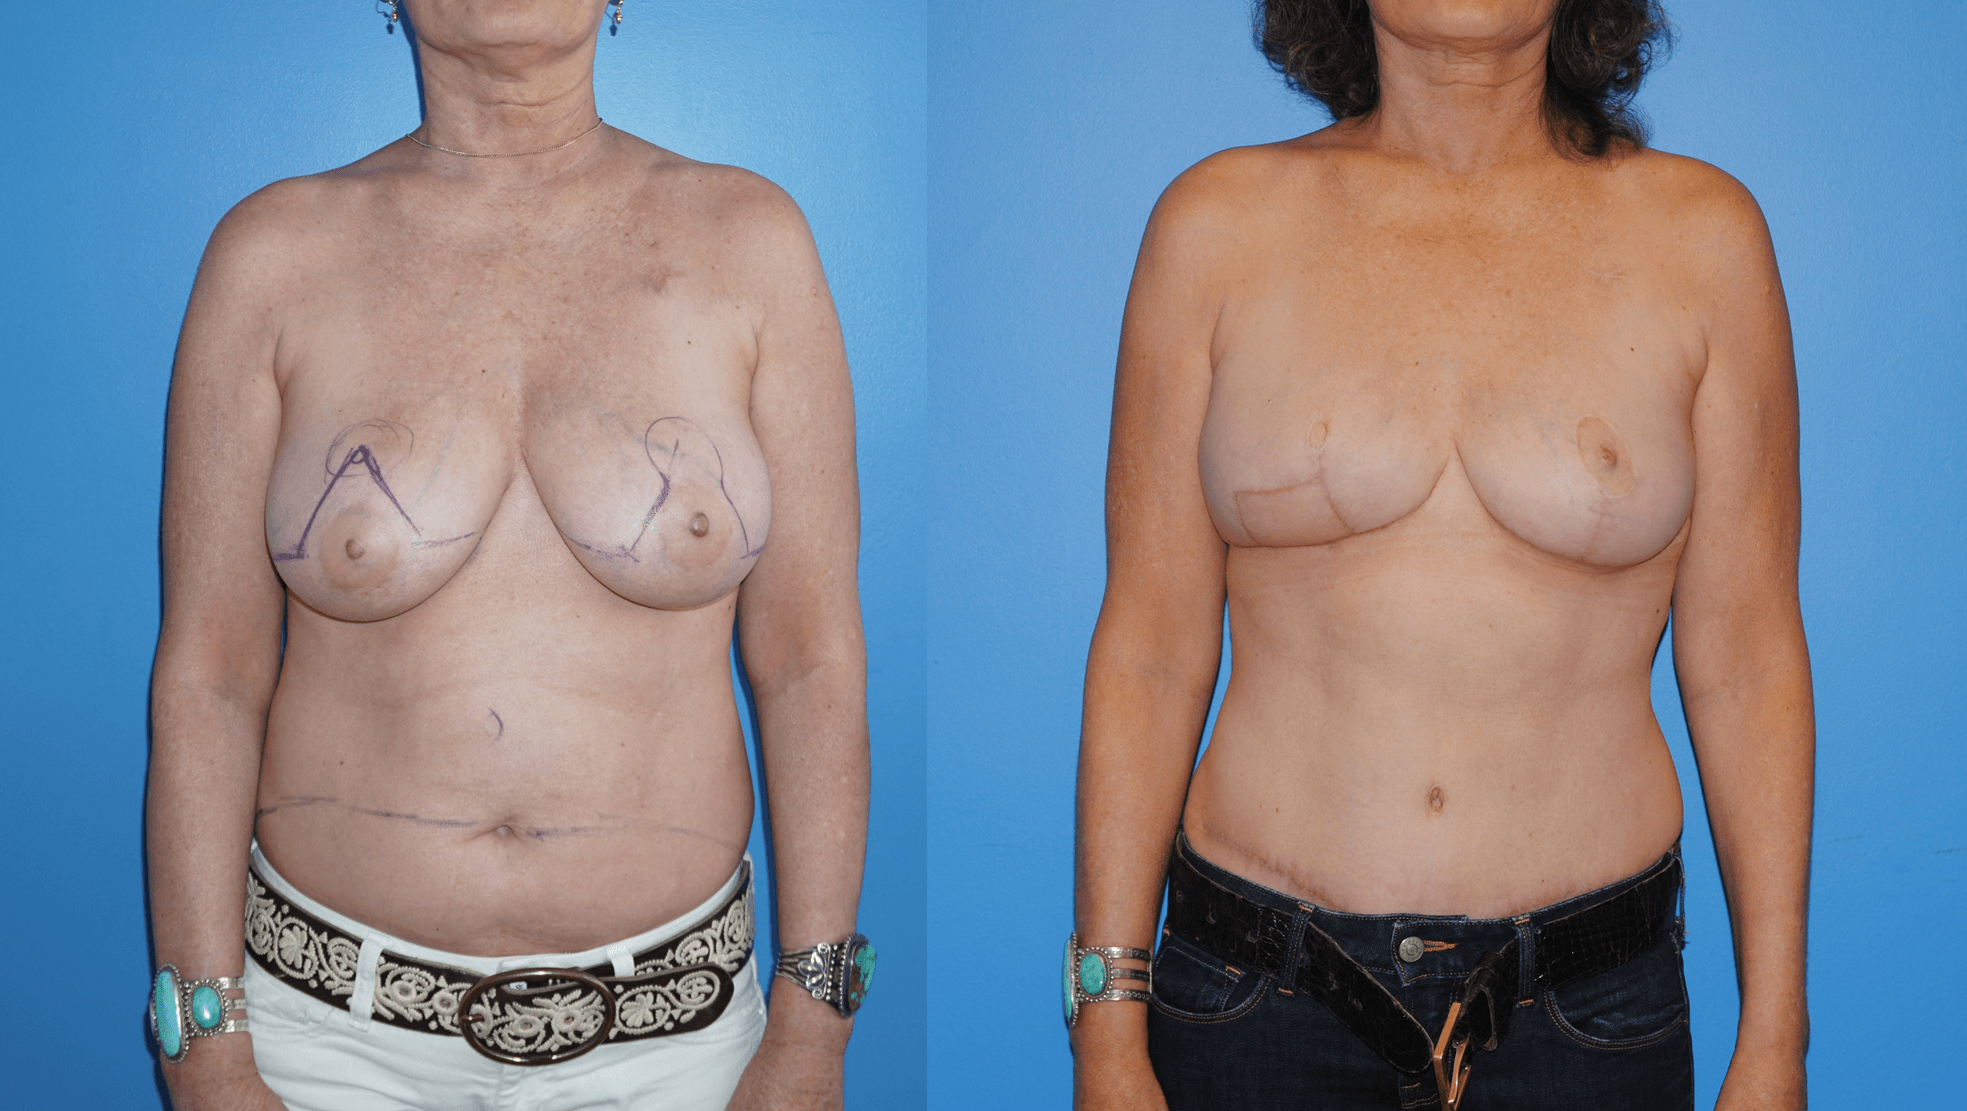 Unilateral DIEP Flap Reconstruction and Contralateral Mastopexy